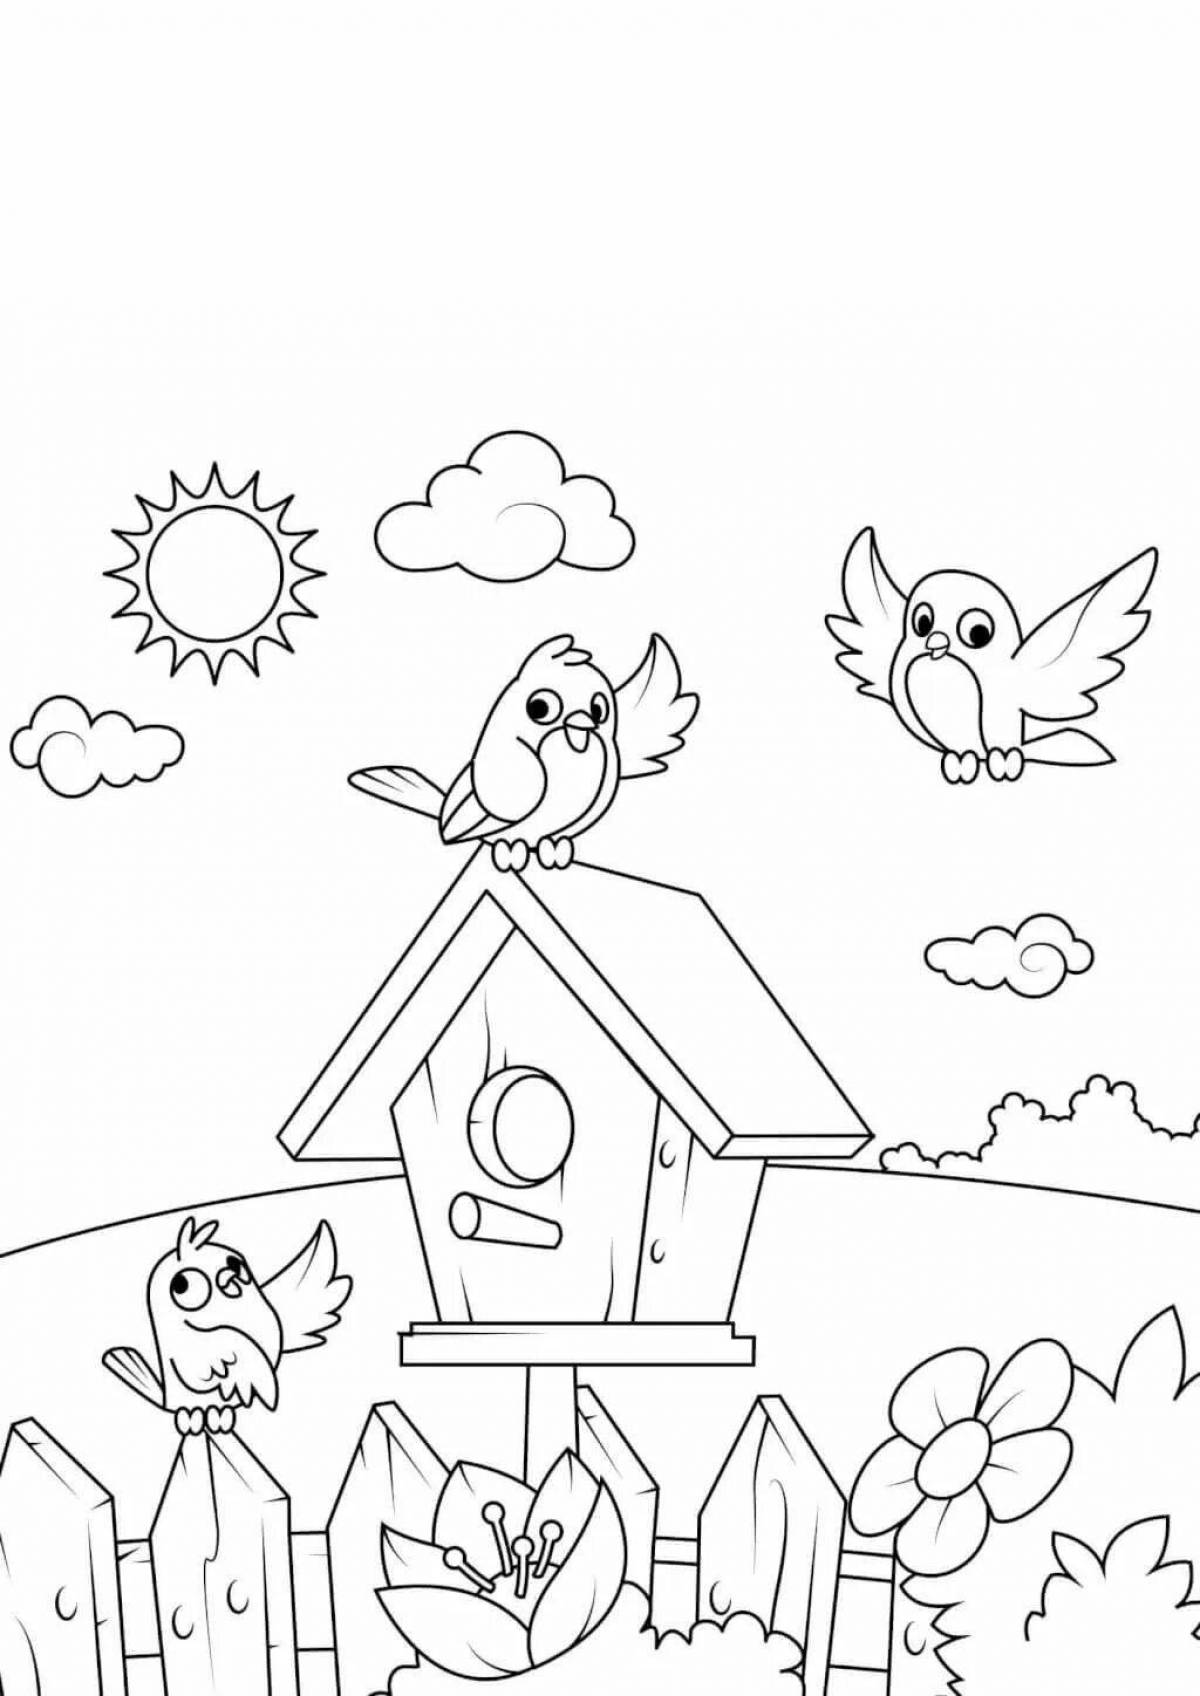 Glowing starling coloring book for kids